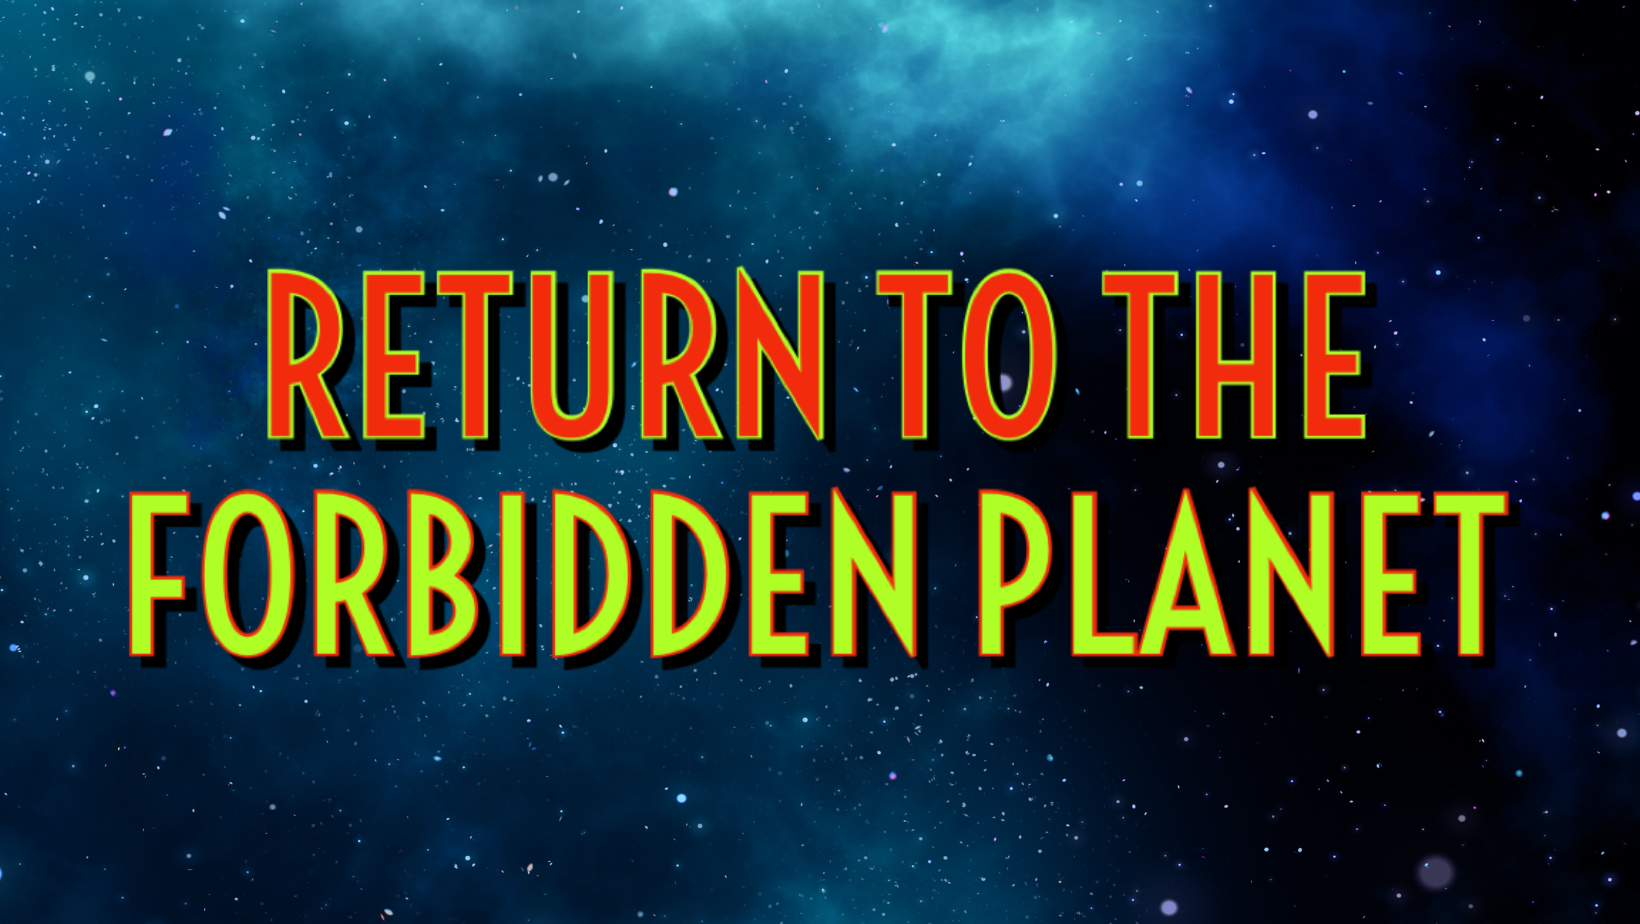 Return to the Forbidden Planet by LAMPS